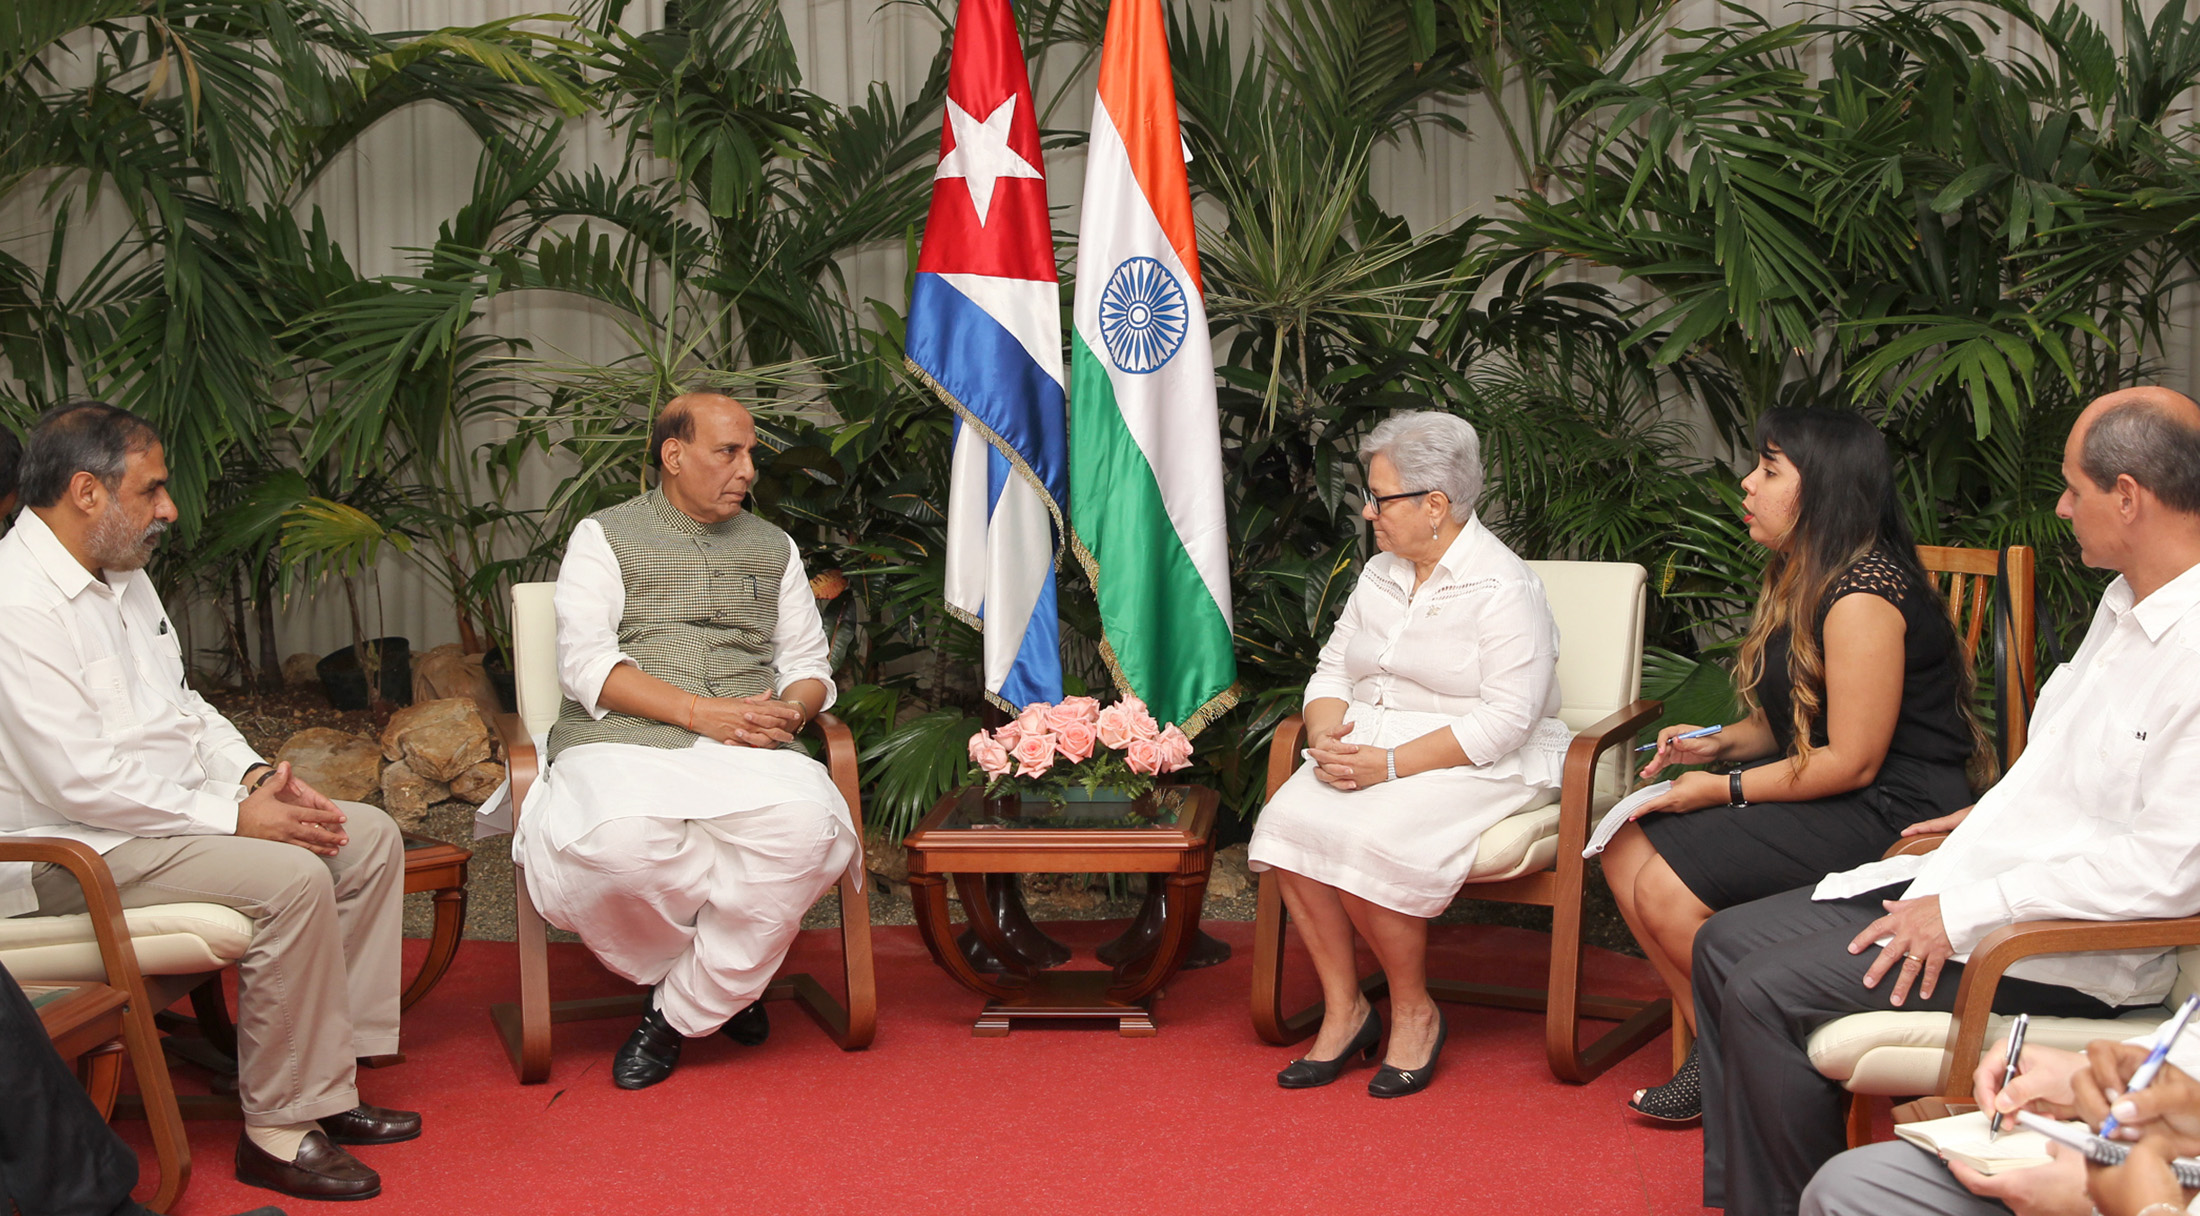 The Union Home Minister, Shri Rajnath Singh meeting the Cuban Vice President of the Council of State, Ms. Gladys Bejerano, in Havana on November 30, 2016.